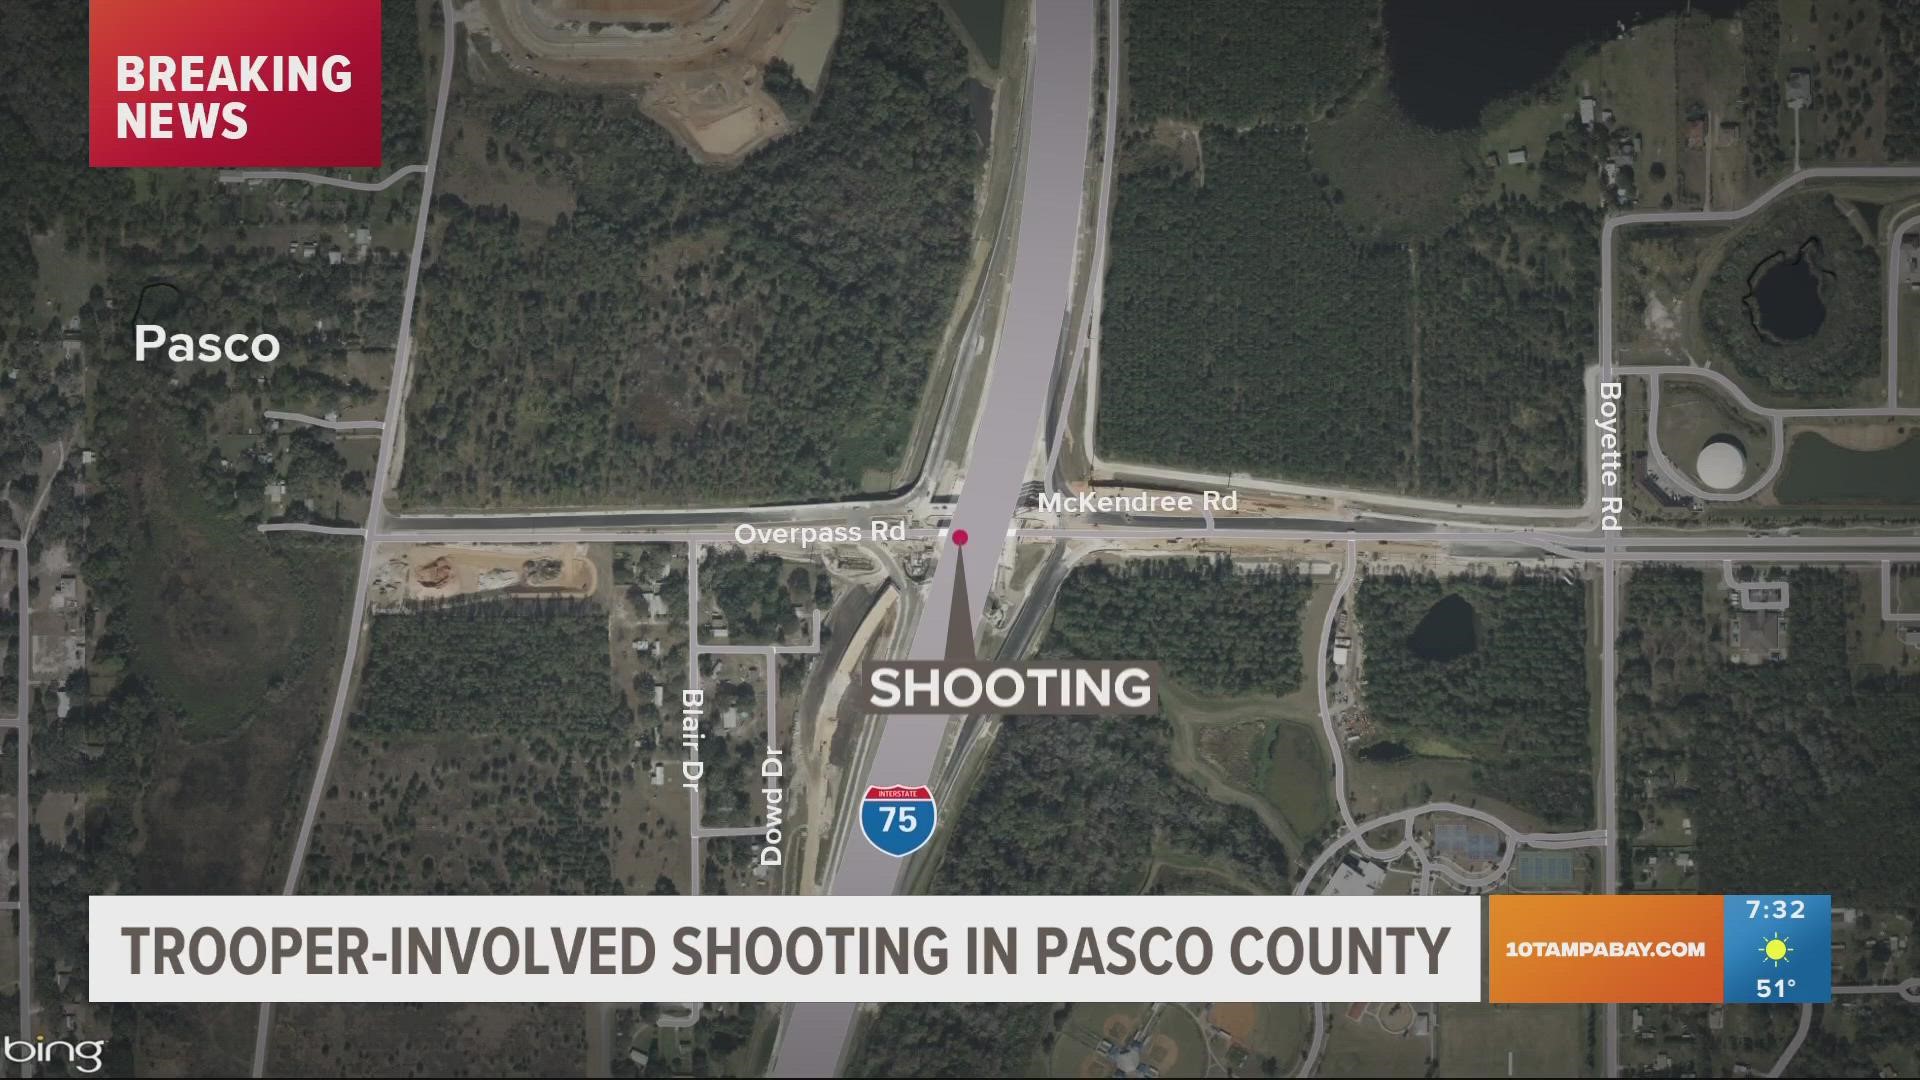 The shooting happened in the area of Overpass Road and I-75